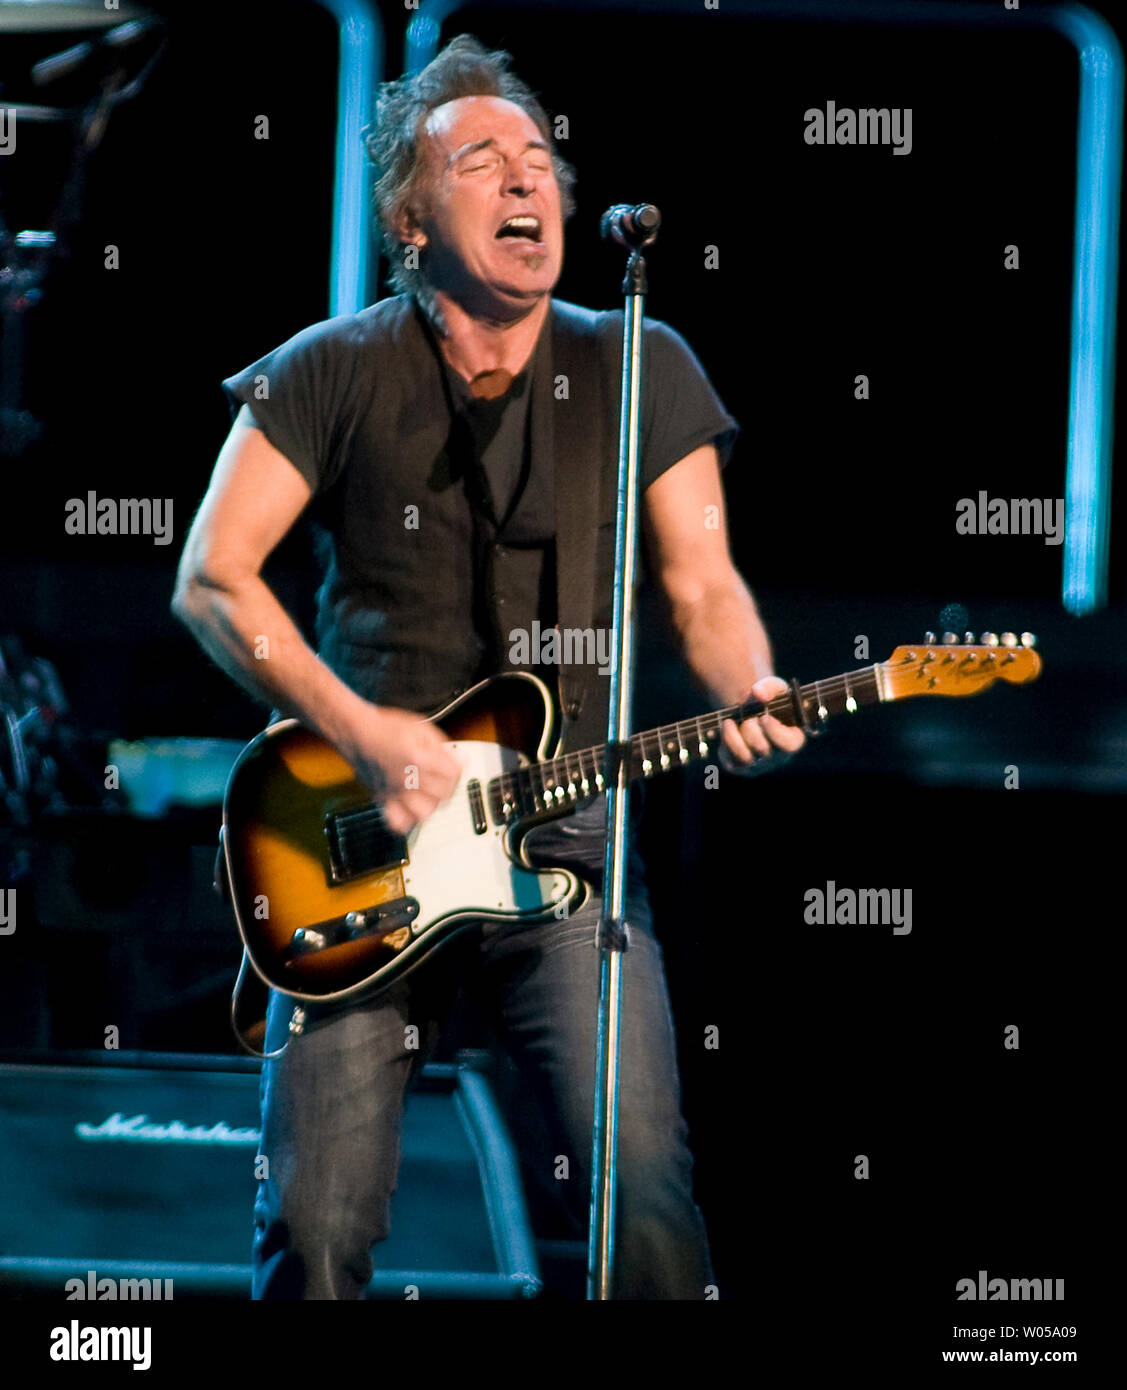 Bruce Springsteen and the E Street Band performs "Radio Nowhere" from the  Magic Album at the Key Arena in Seattle on March 29, 2008. The band is  performing 55 tour dates that